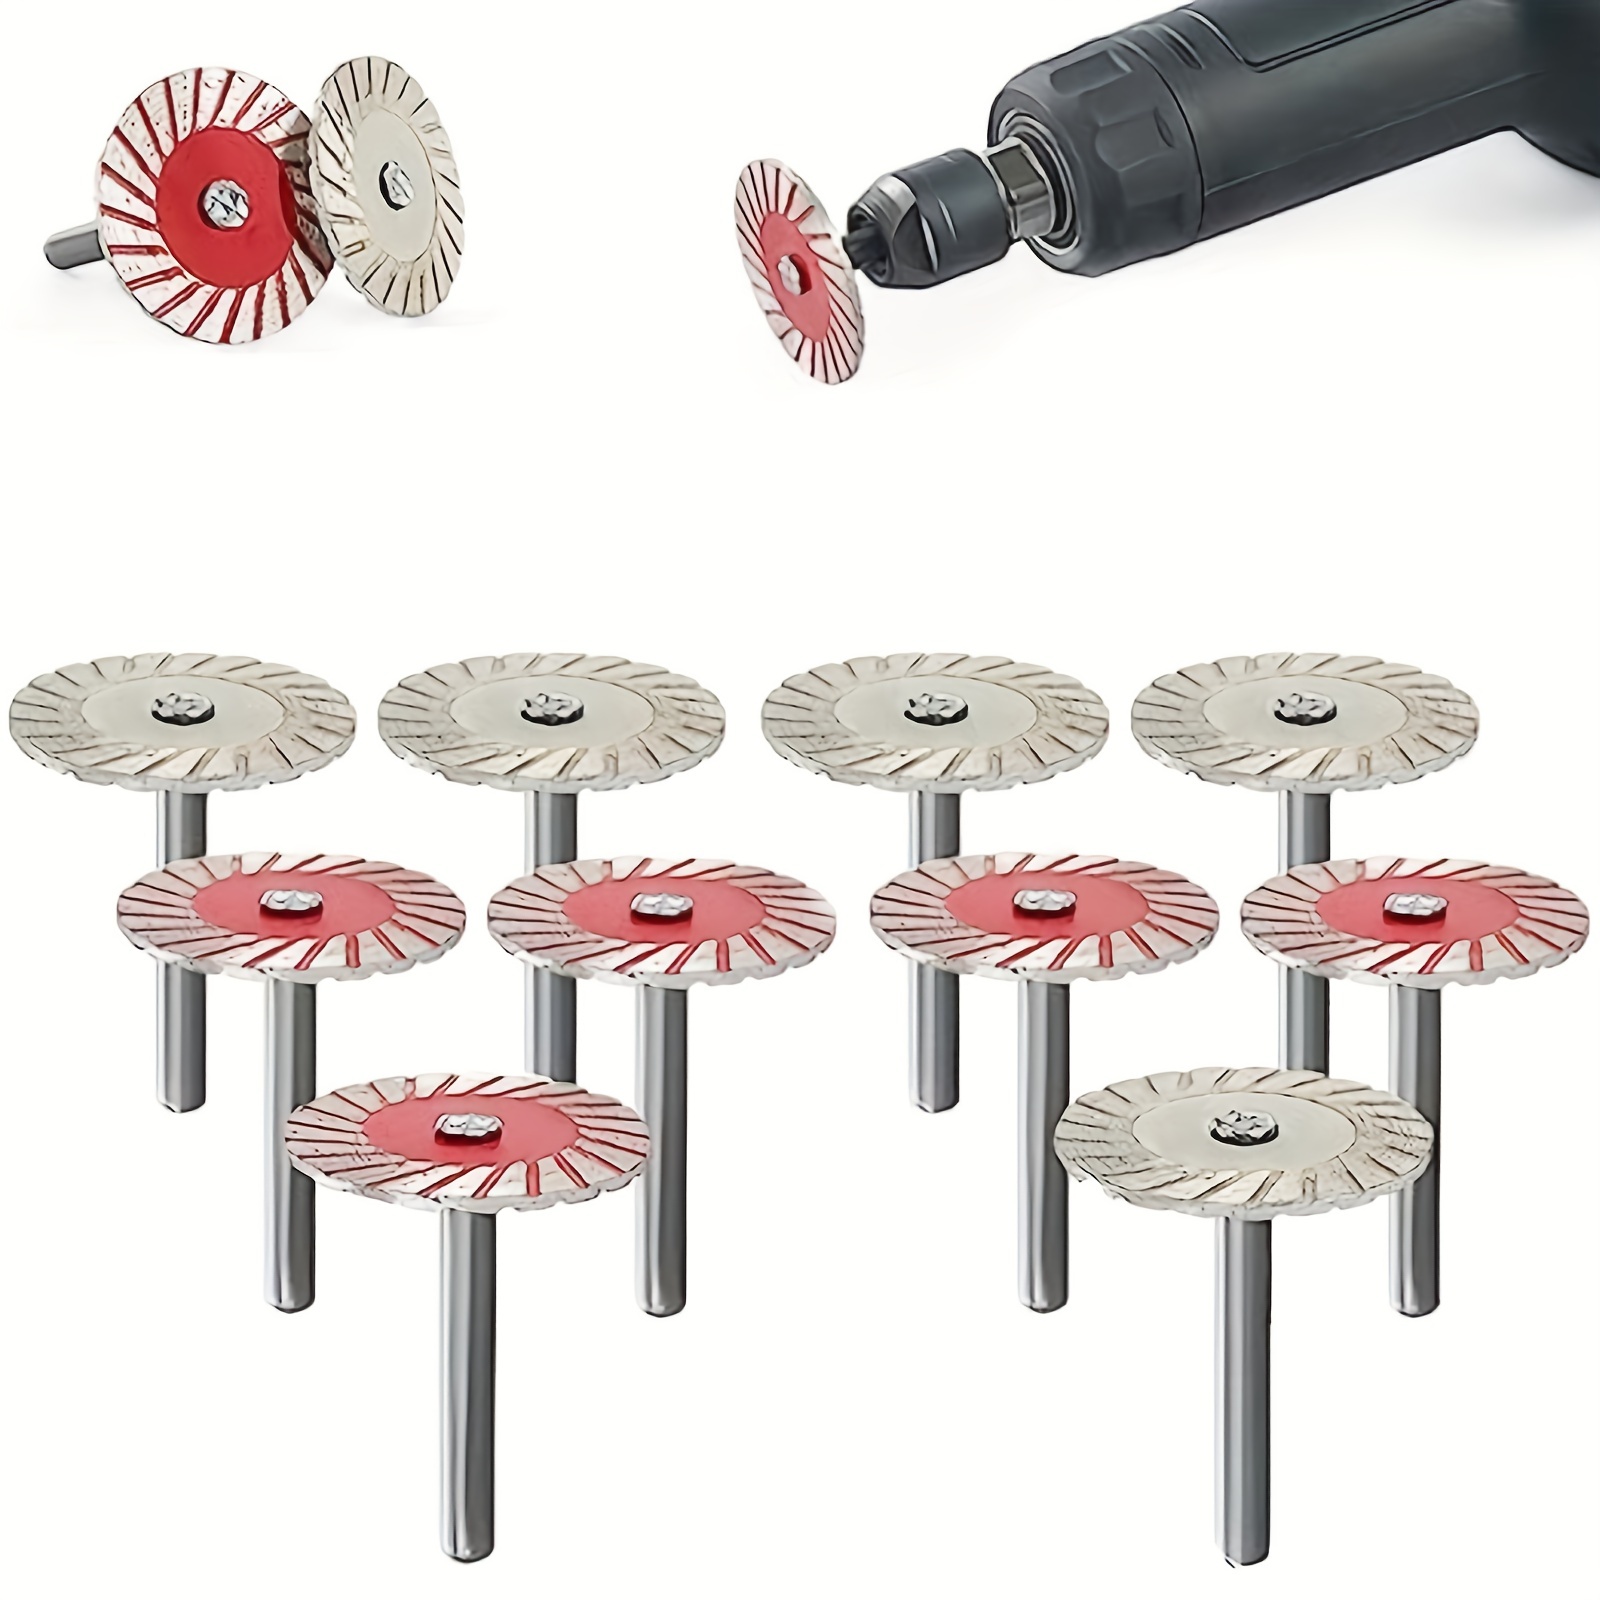 Indestructible Disc for Grinder - 5 PCS Glass Cutting Disc 7/8 & 5/8  Arbor, 4 Inch Glass Saw Ultra-Thin Saw Blade for Grinding of Glass, Jade,  Wine